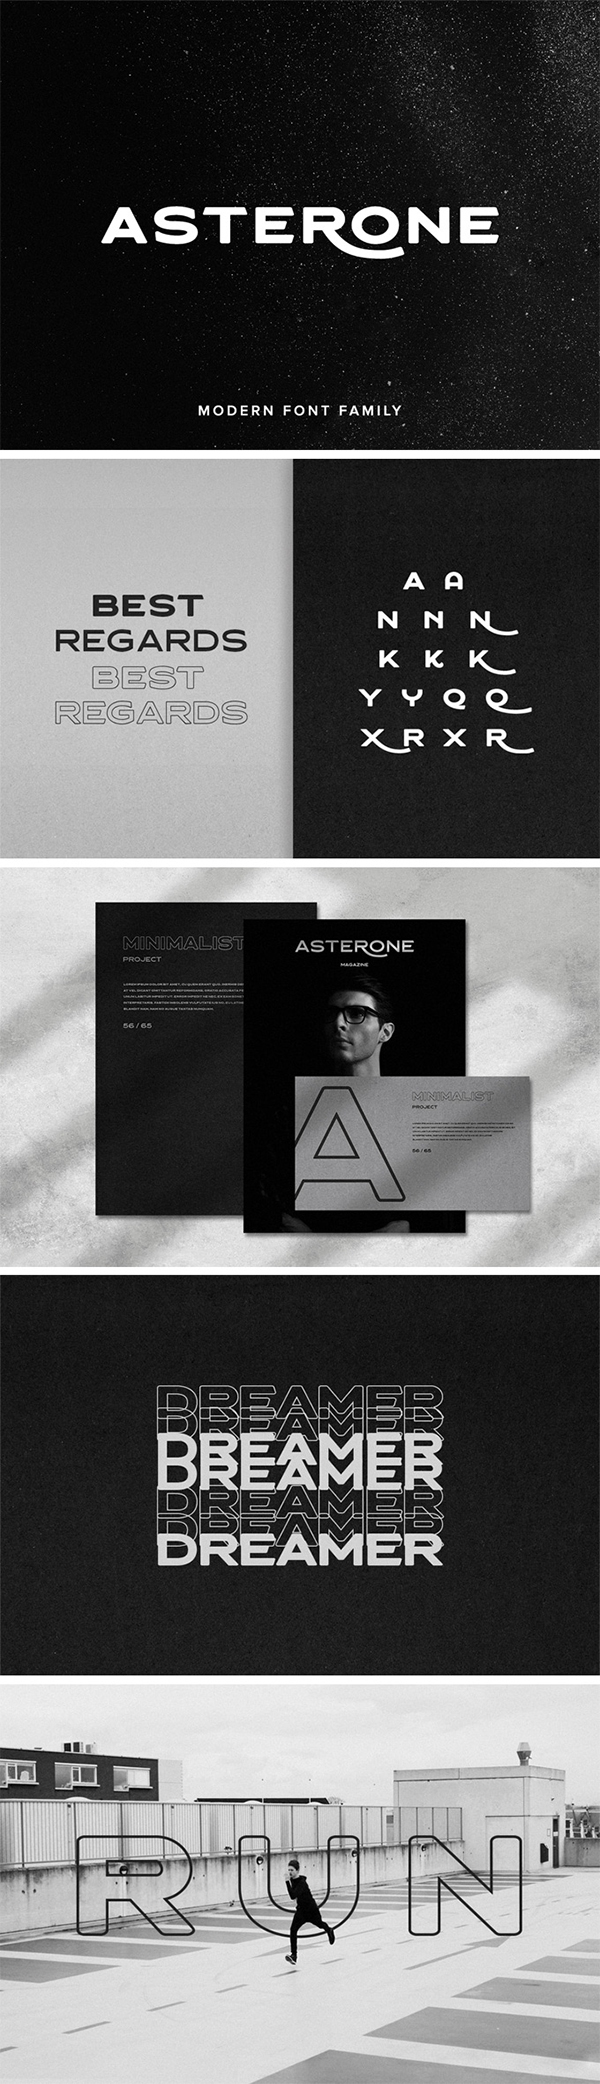 Asterone Free Font